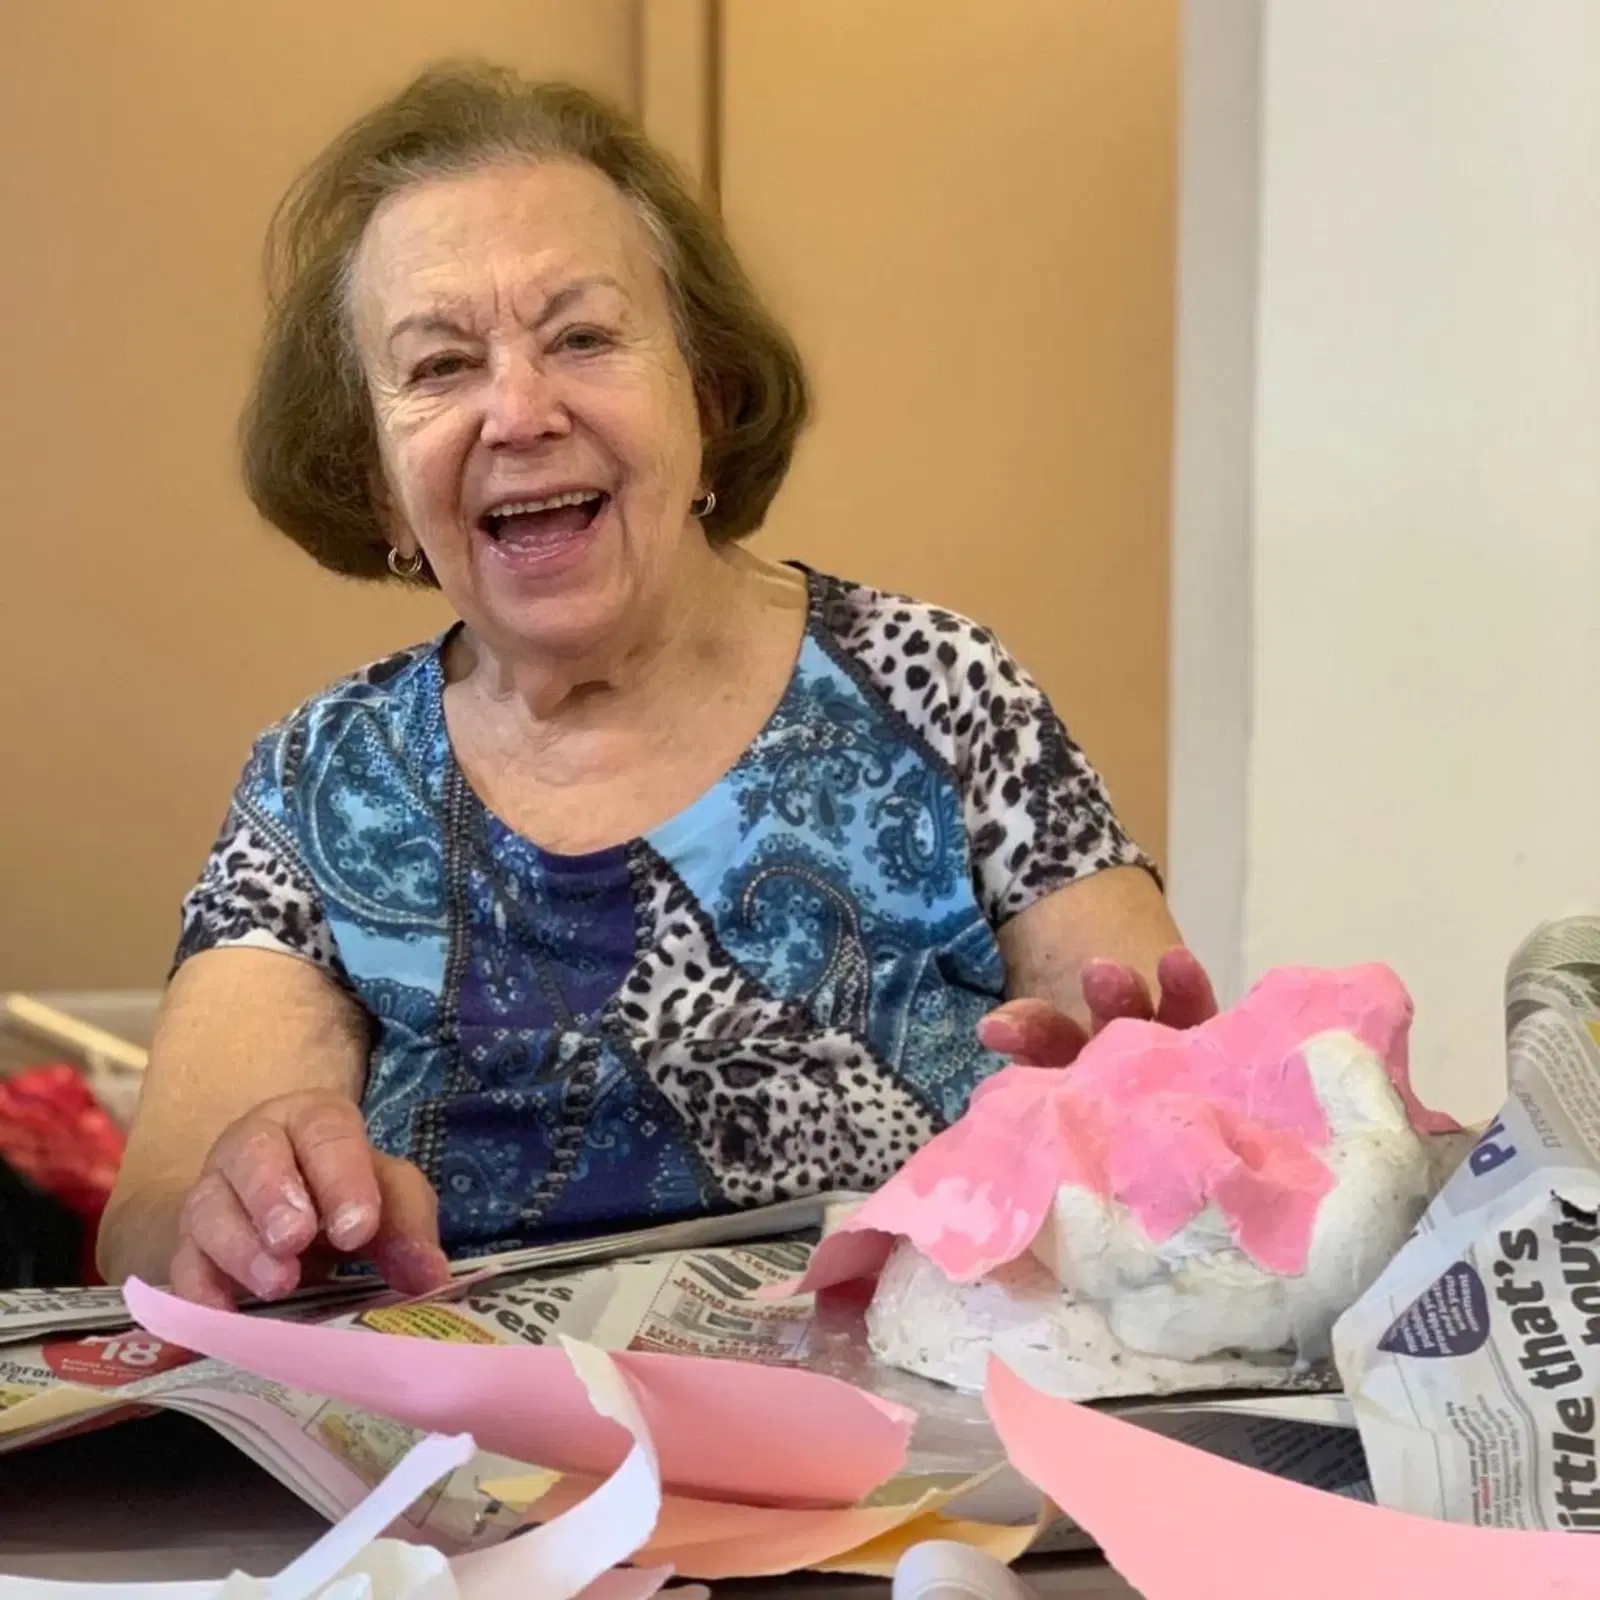 An elderly woman with a joyful expression sitting at a table engaged in a craft activity, with a colorful paper-mâché project in front of her.